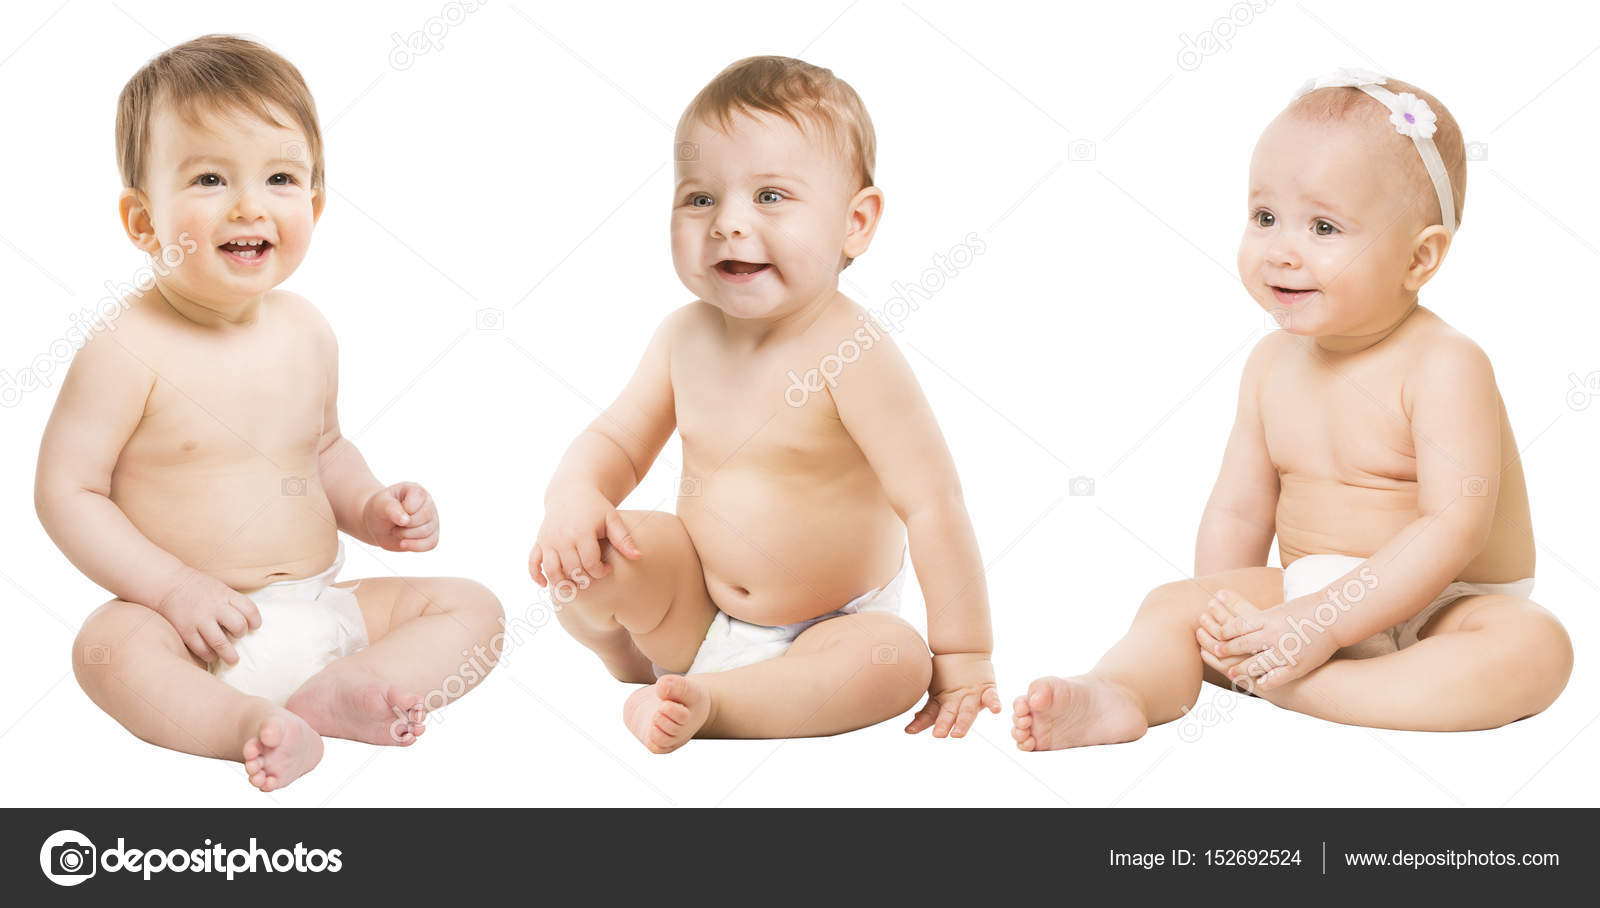 Naked girls kids in diapers Baby Over White Background Kids Babies Sitting In Diapers Boy And Girl Stock Photo By C Inarik 152692524